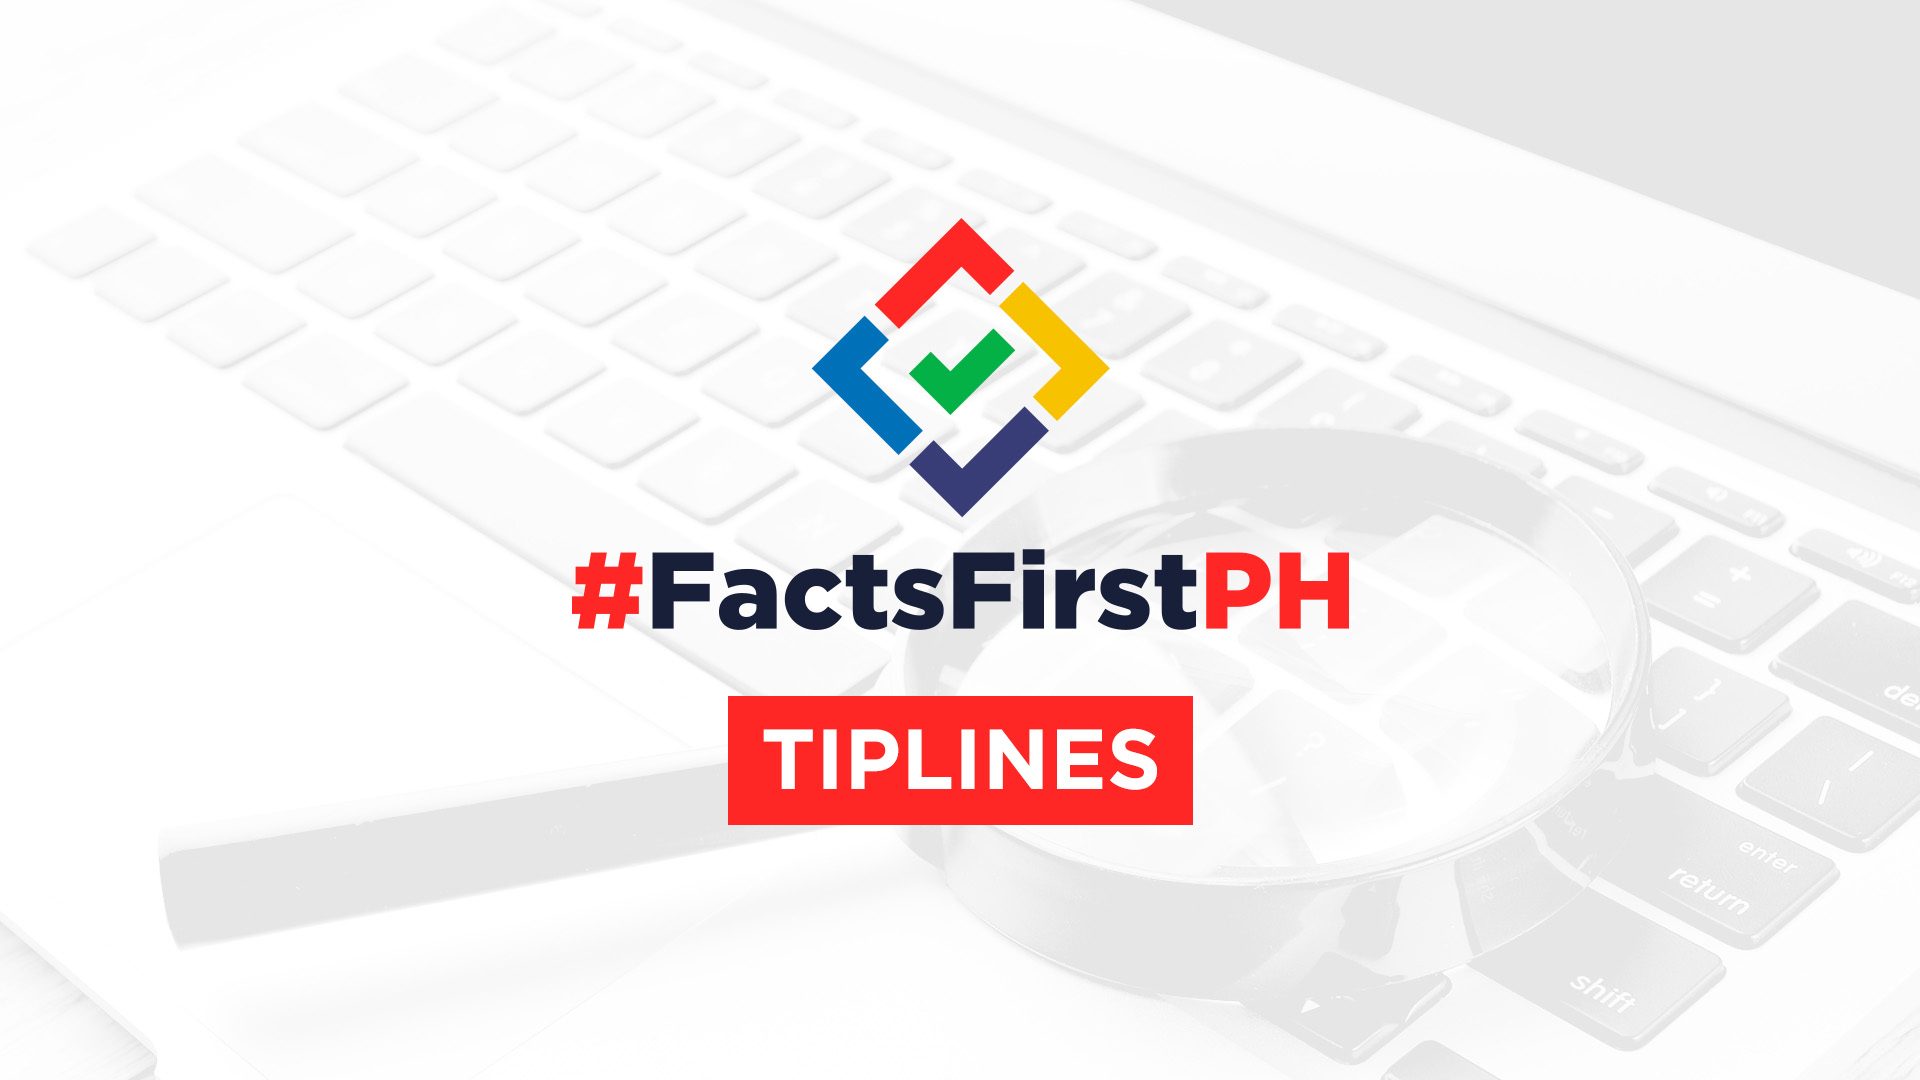 How to report dubious claims to #FactsFirstPH